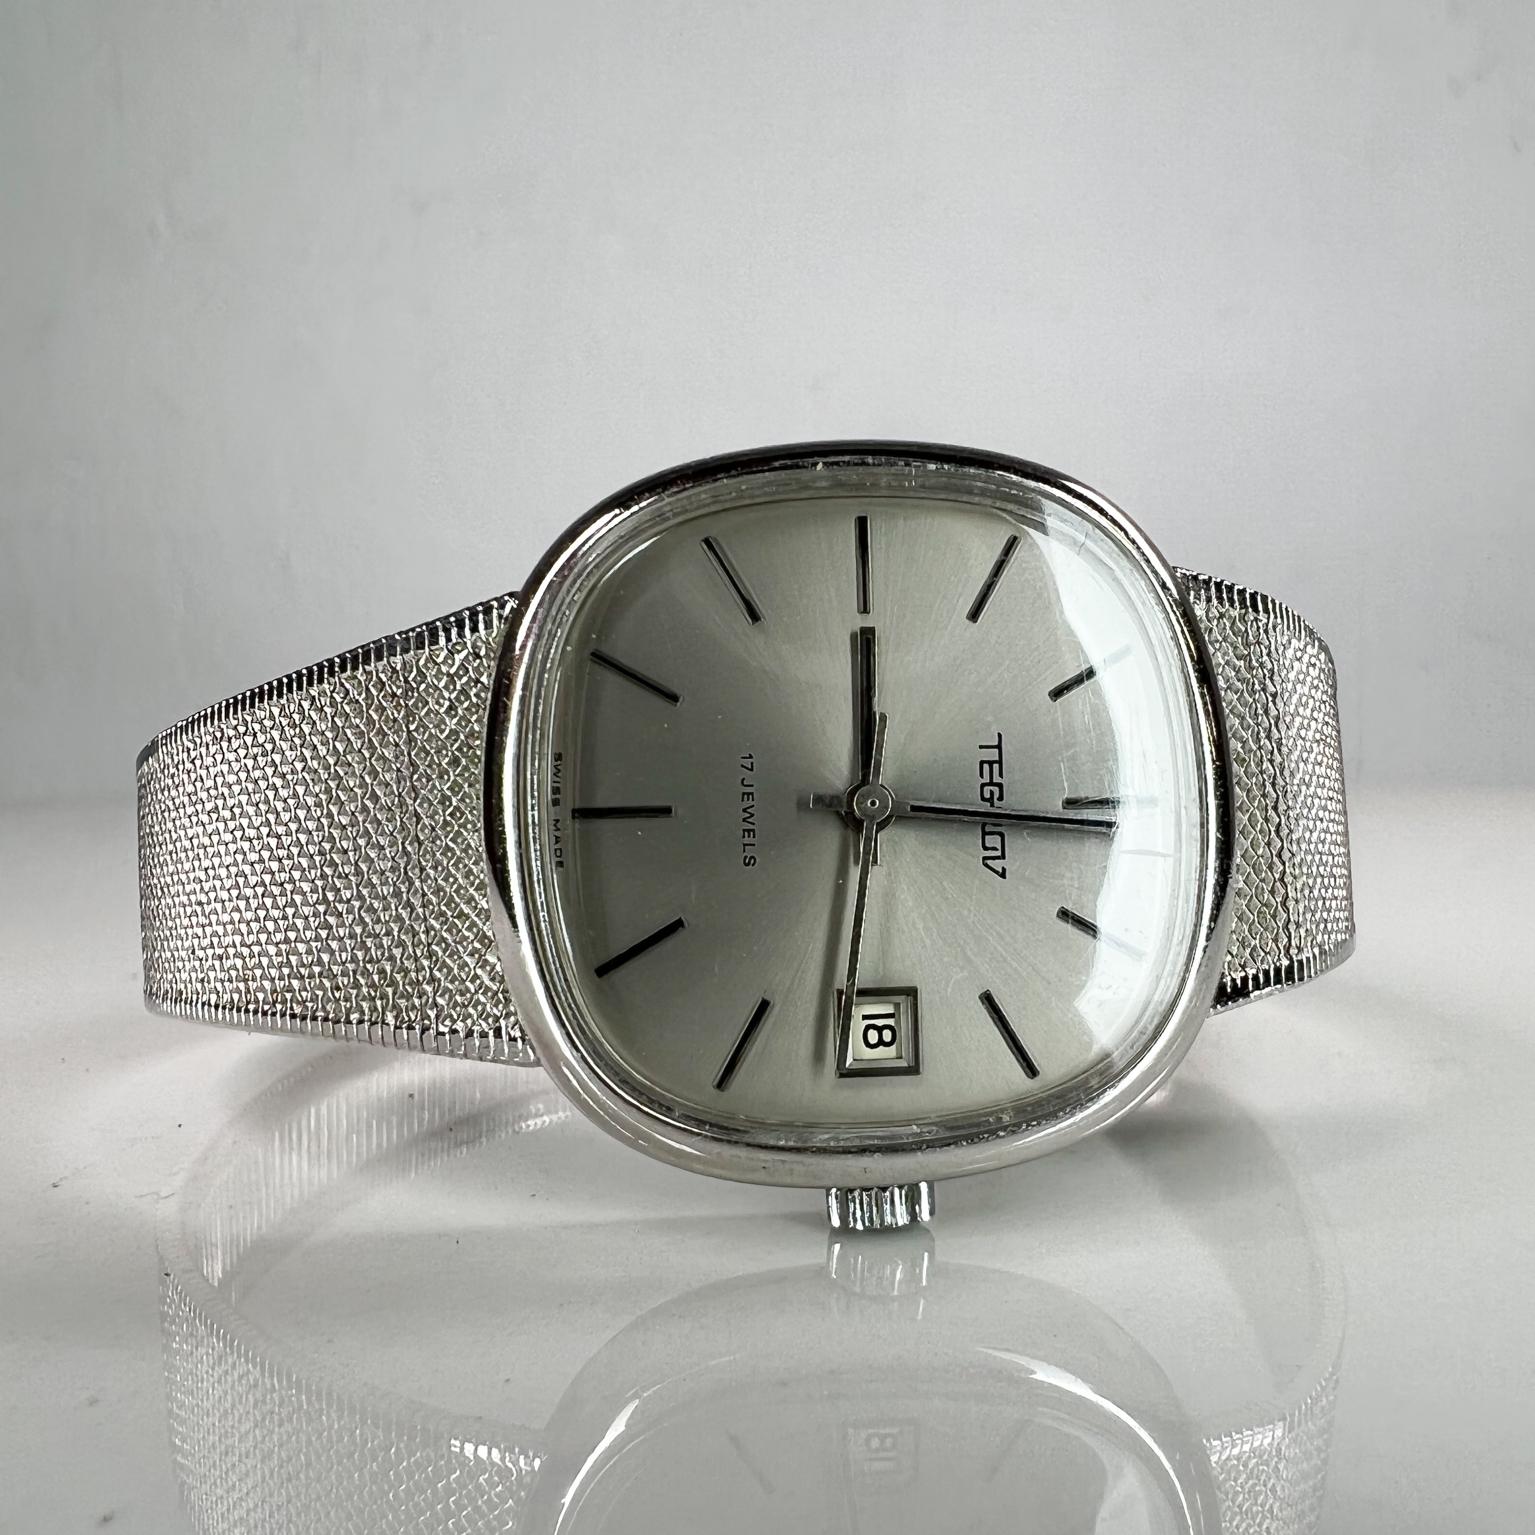 Vintage Tegrov Swiss made vintage Mechanical watch
17 jewels 
Stainless steel
Measures: 9 long x 1.38 w x .38 thick
Preowned original unrestored vintage condition
See images provided.


